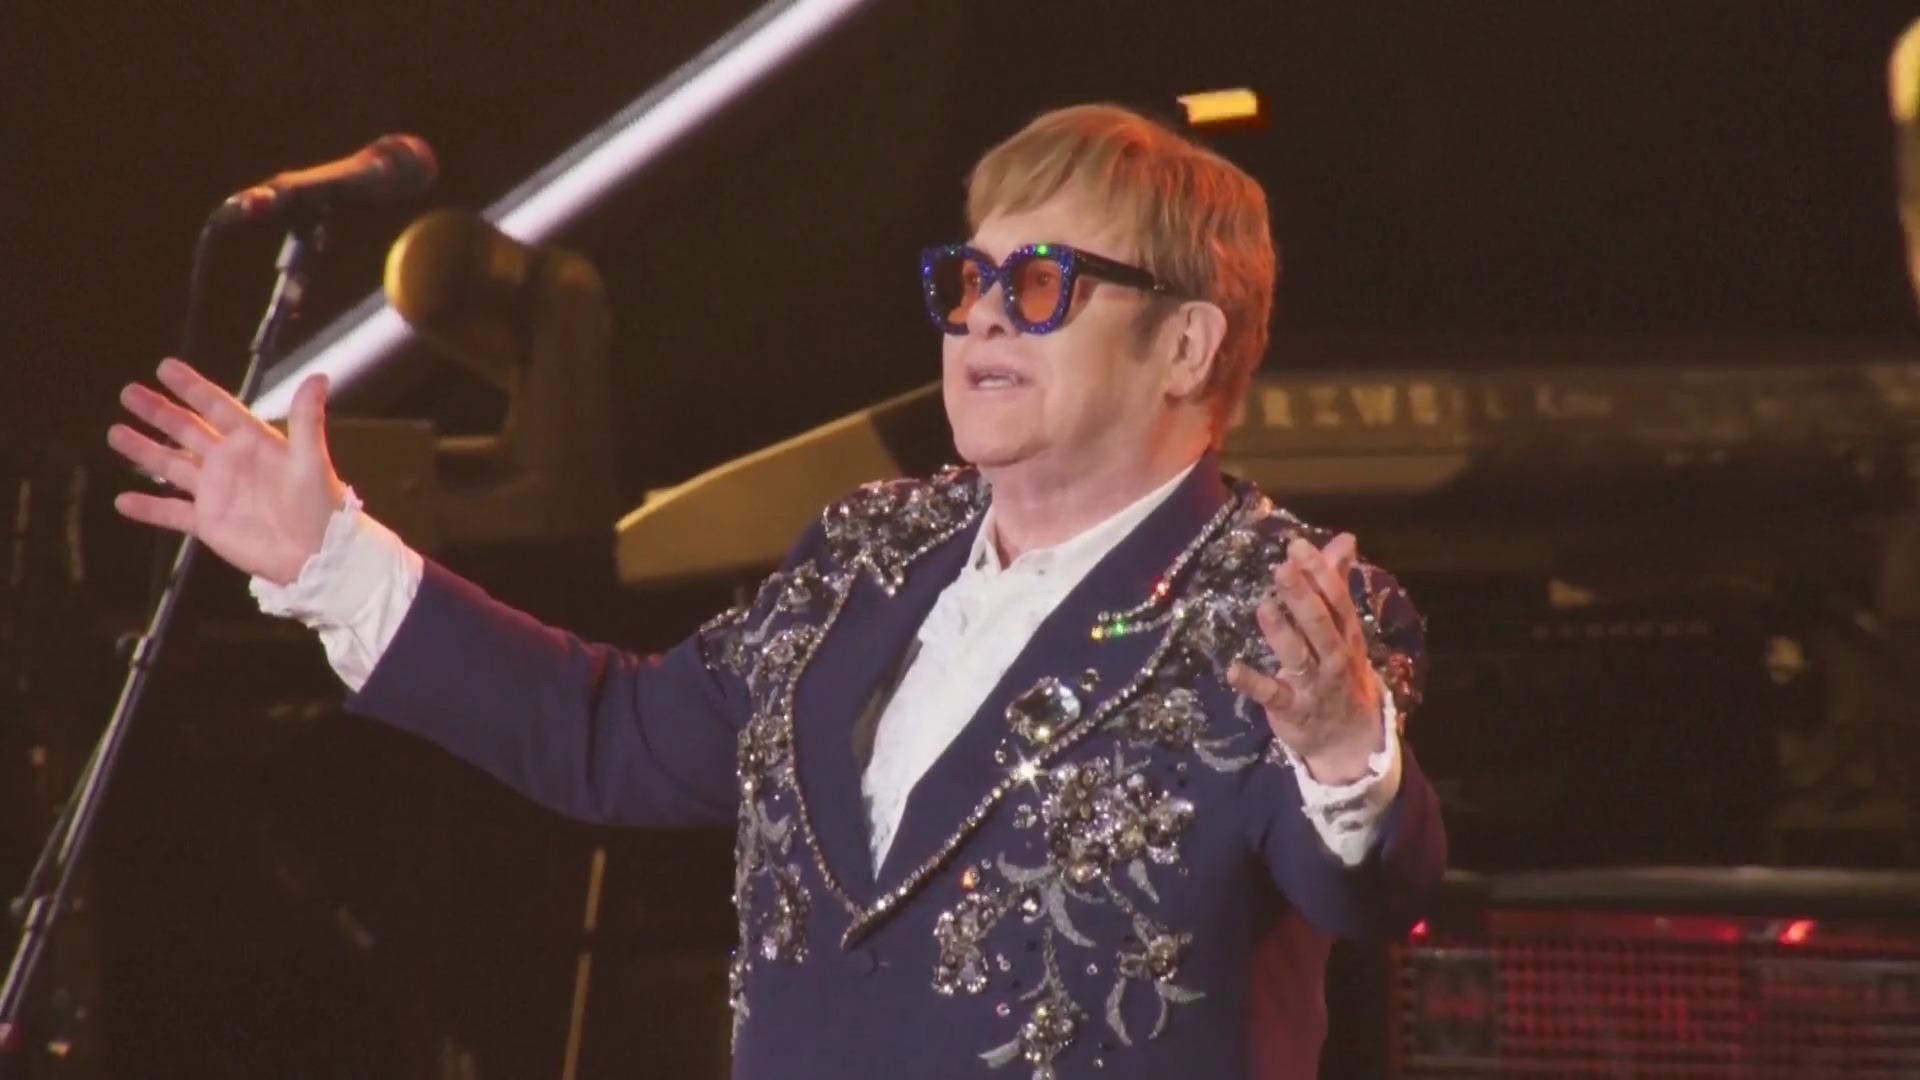 Here Elton John is standing one last time on the big stage Goodbye, Rocketman!